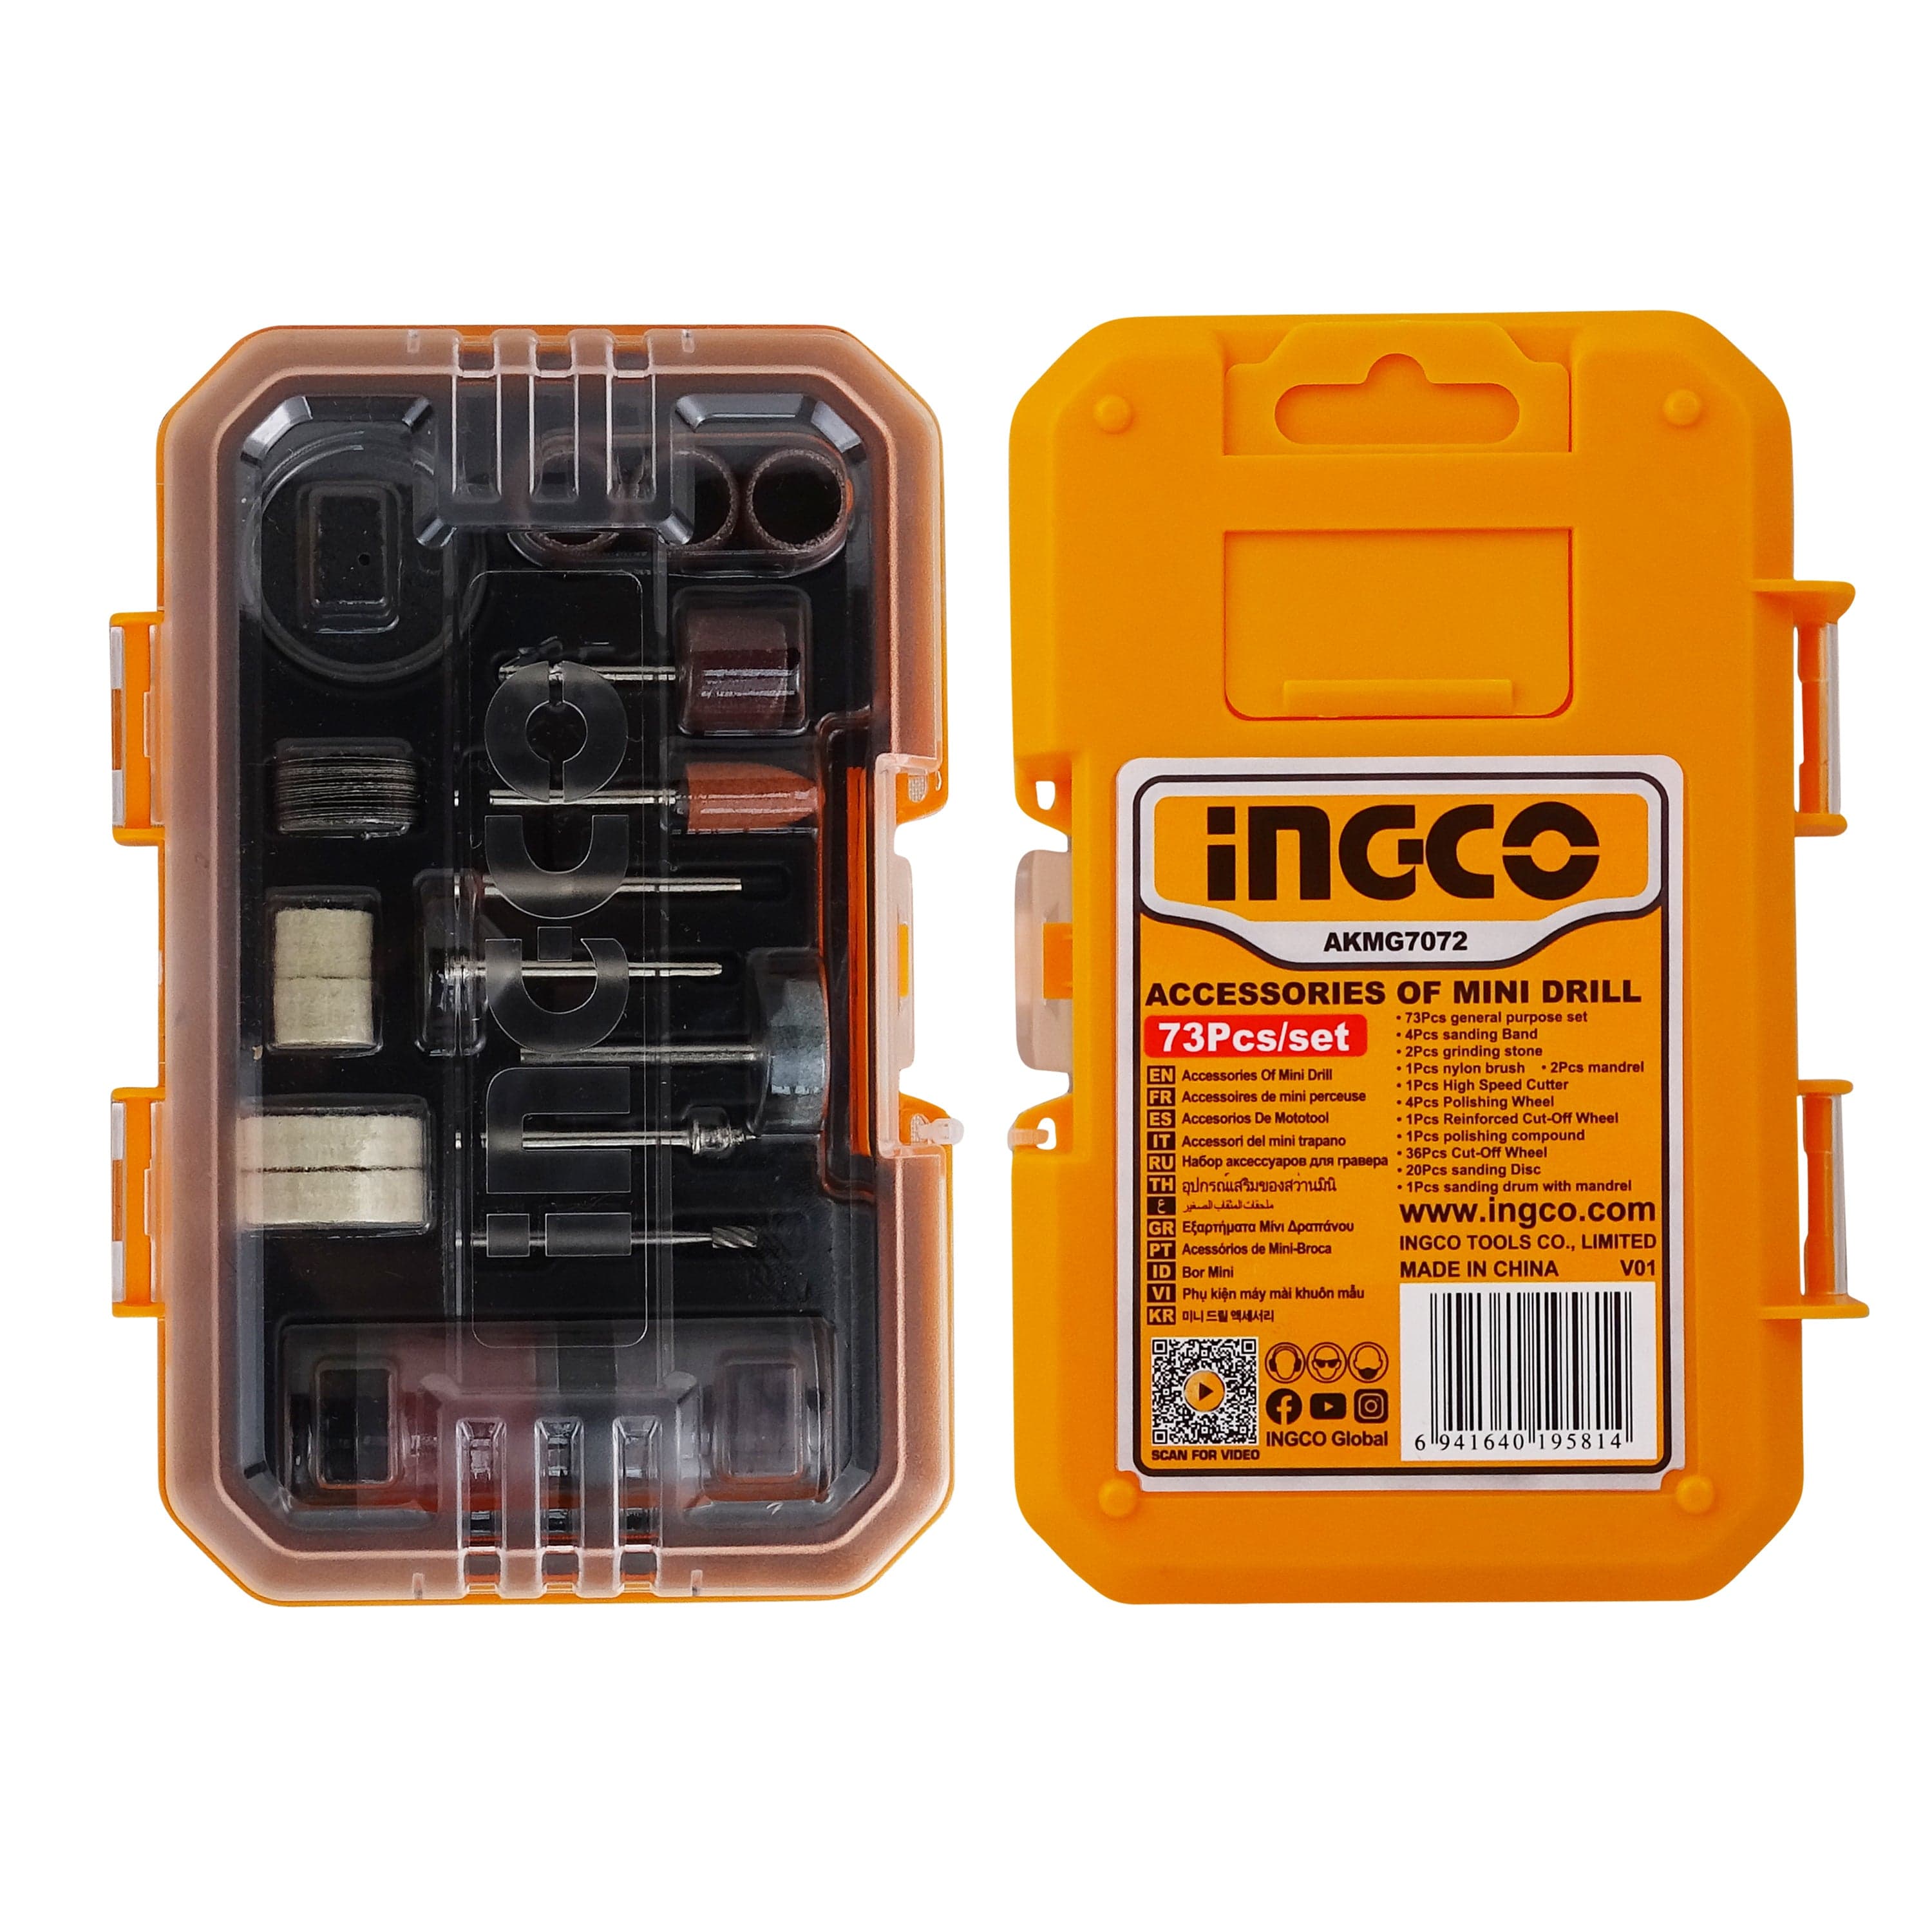 Ingco 73 Pieces Accessories for Mini Die Grinder - AKMG7072 | Supply Master Accra, Ghana Oscillating Tool Accessories Buy Tools hardware Building materials